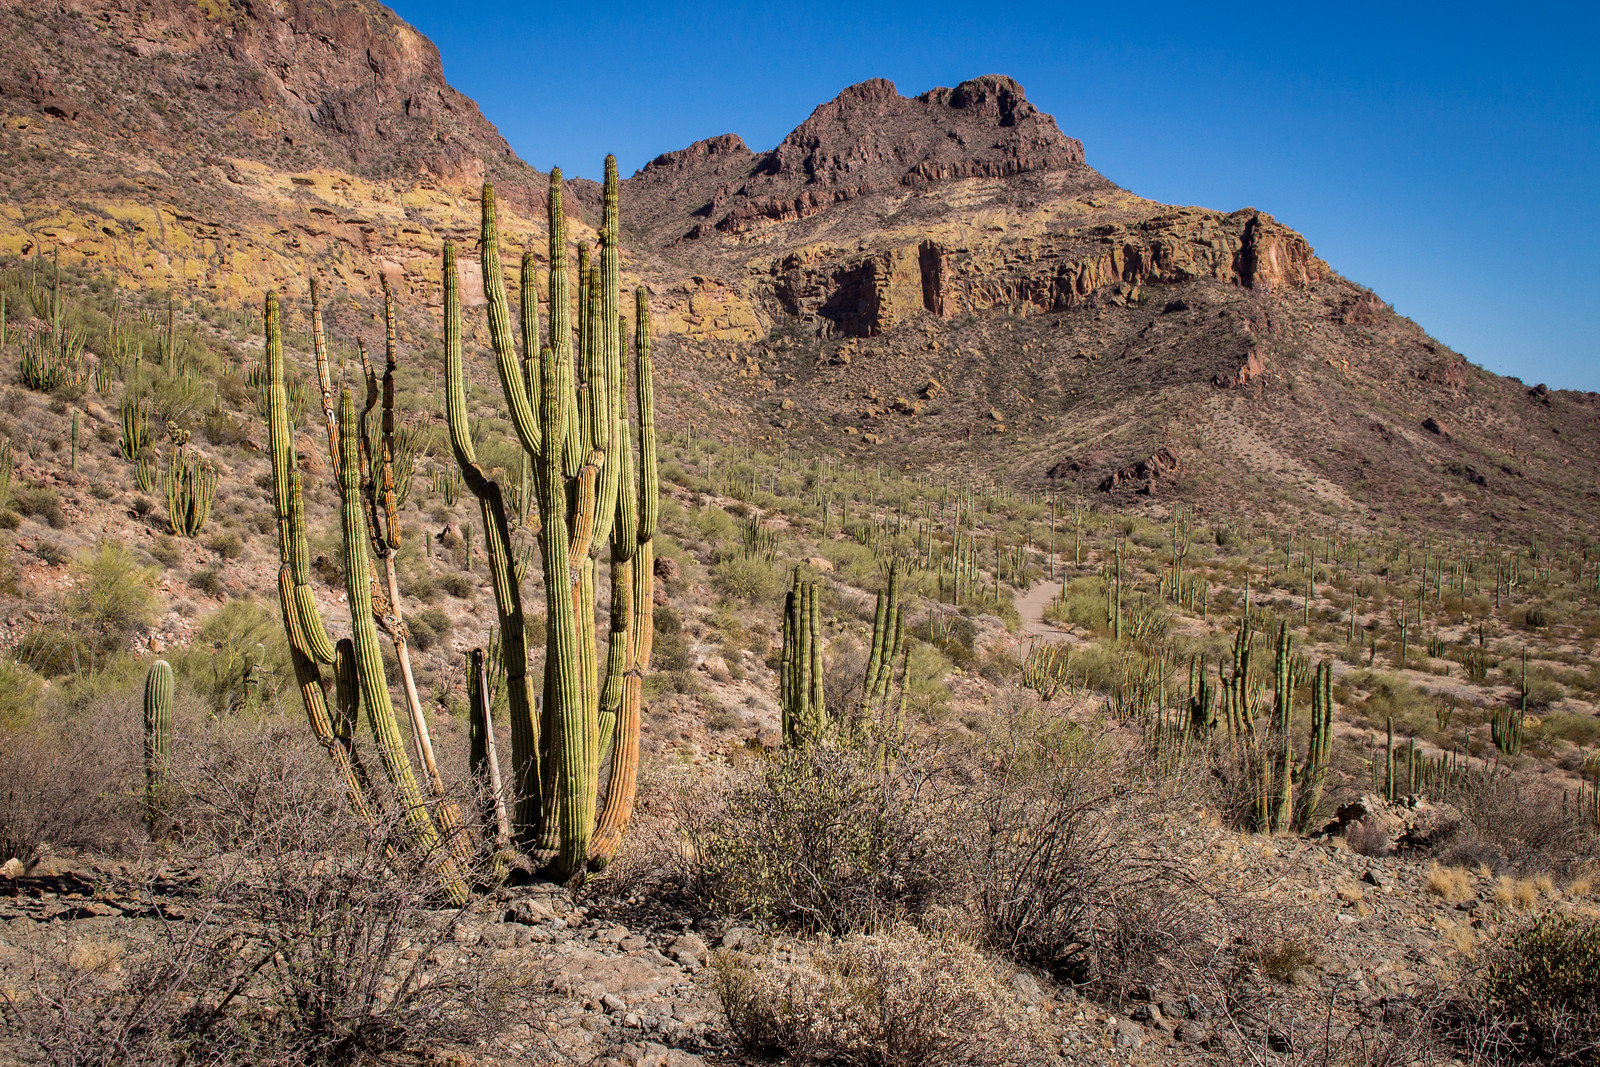 A stand of cactus and creosote bush growing on the hillside of a mountain